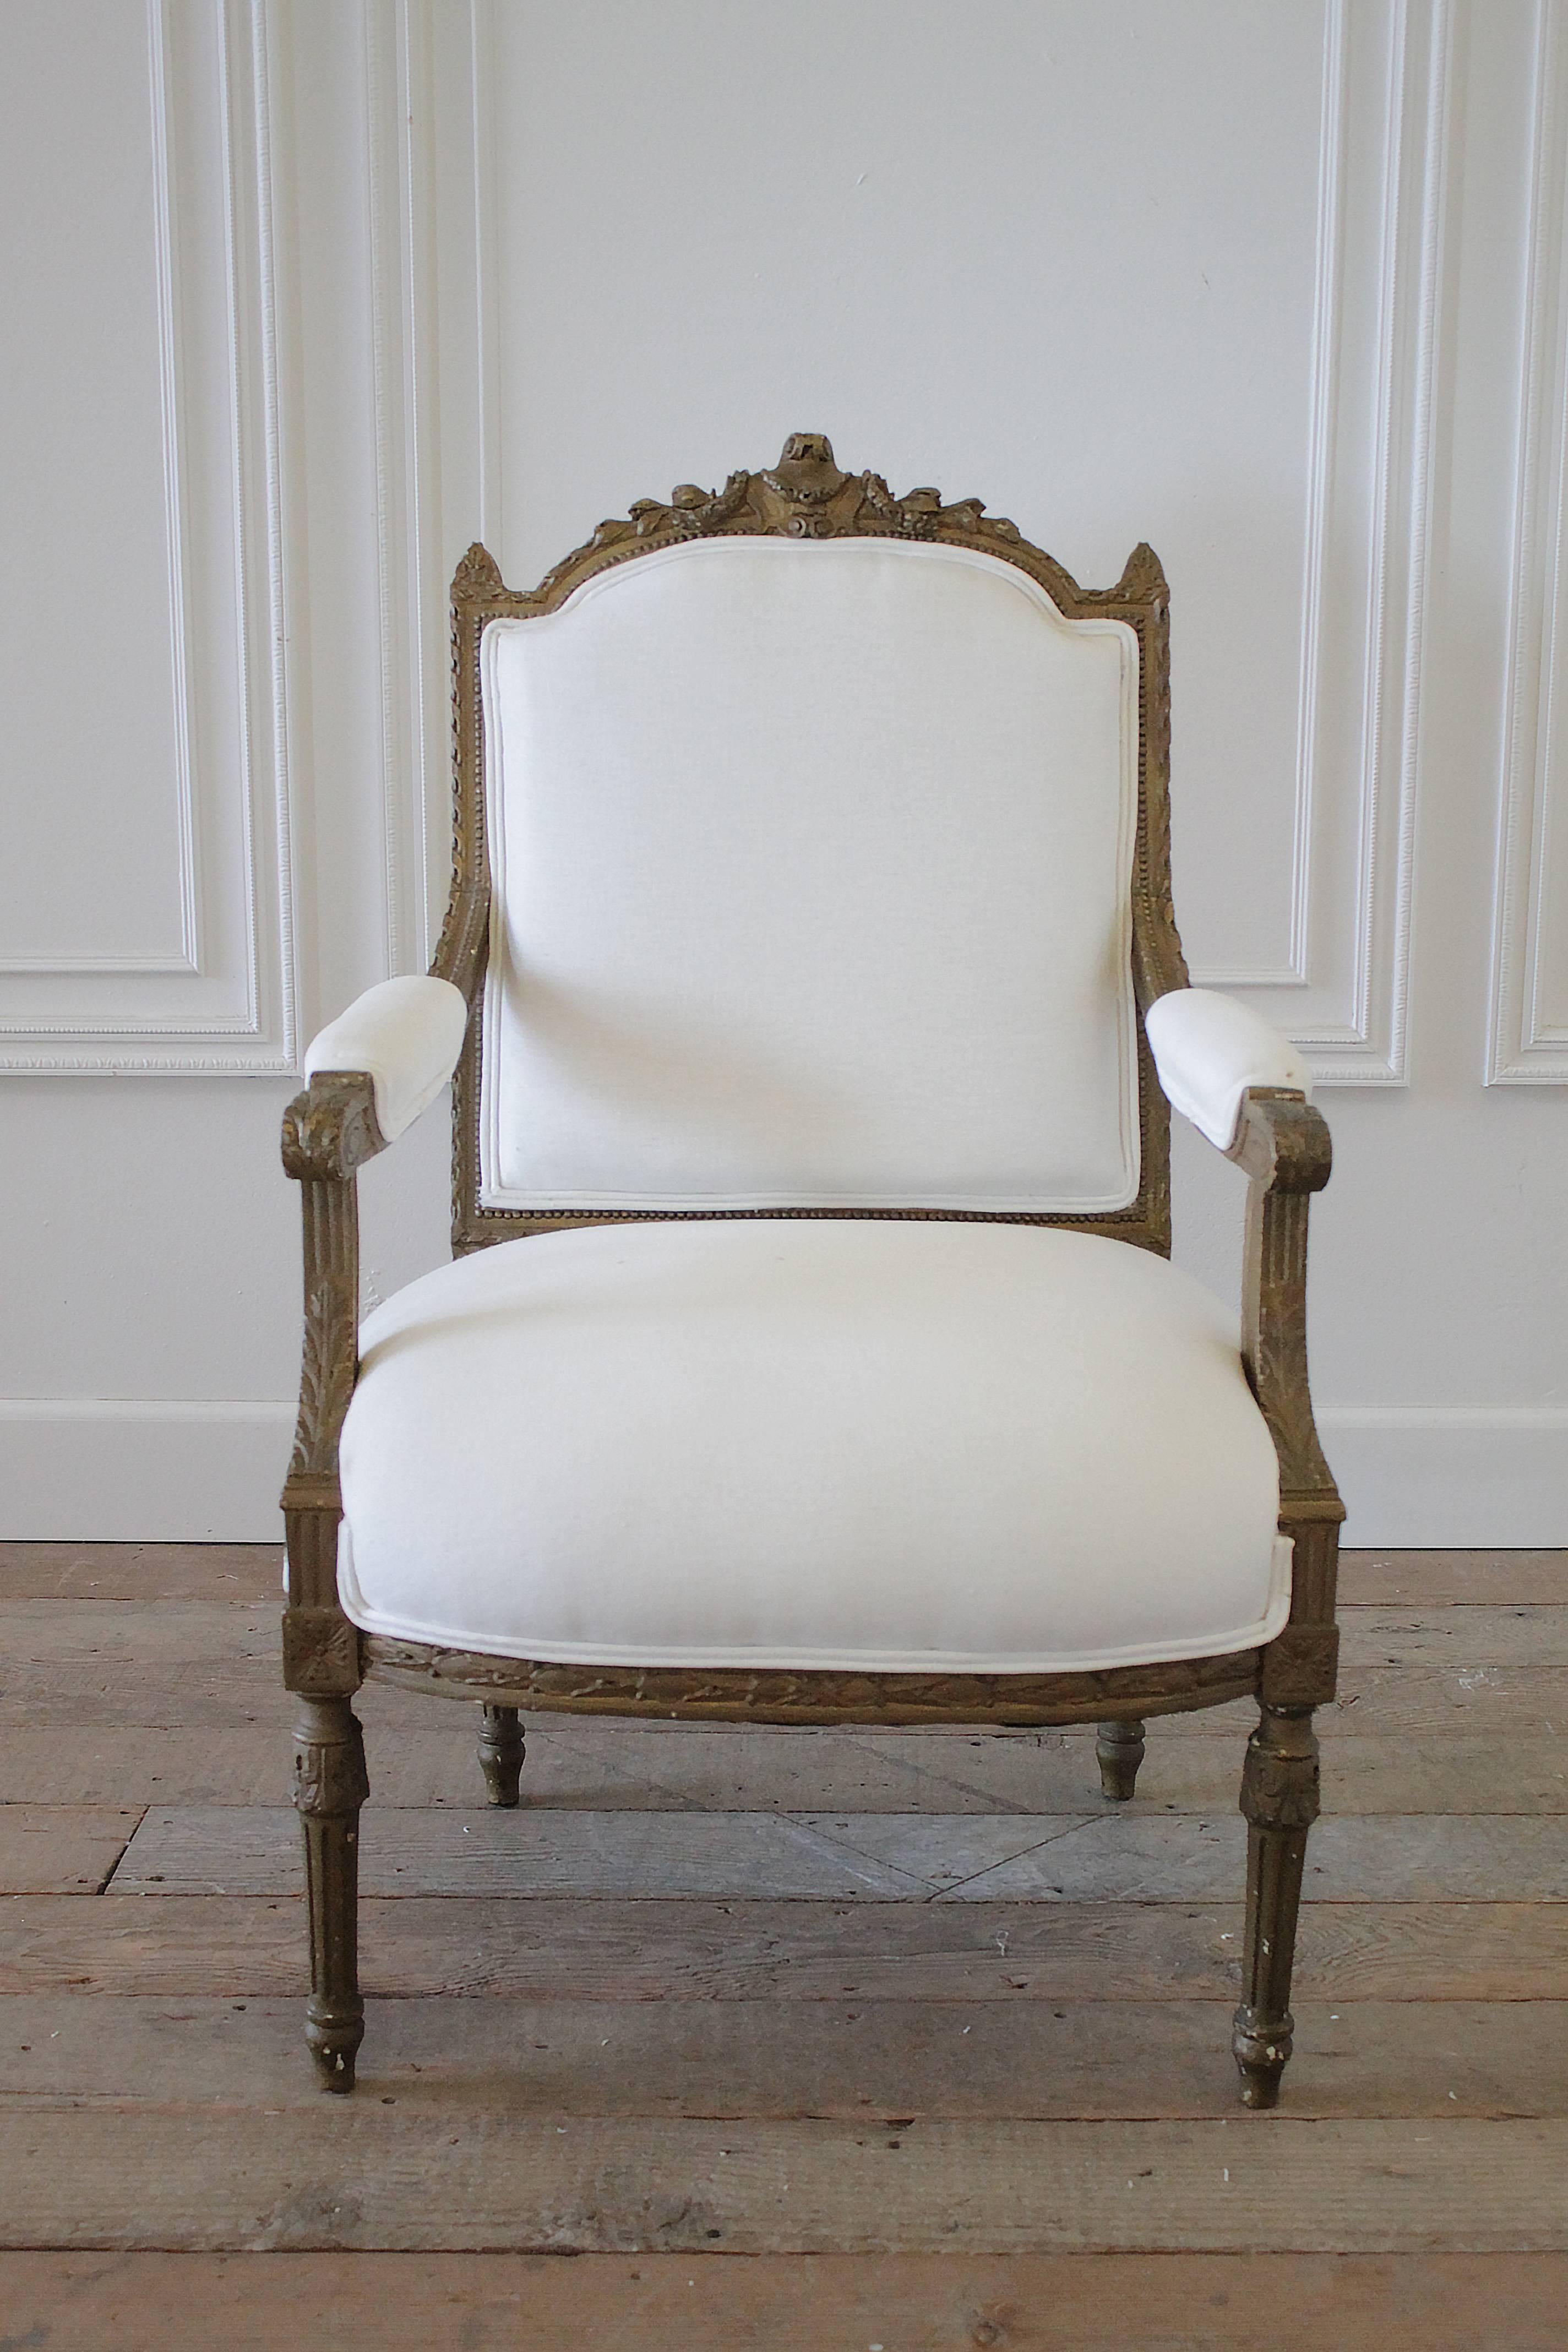 19th century carved open armchair has the original gilt finish, subtle distressing to the gilt with carved sheild medallion, floral swags and curled ribbon edge. The chair has new upholstery in a soft white linen finished with a double